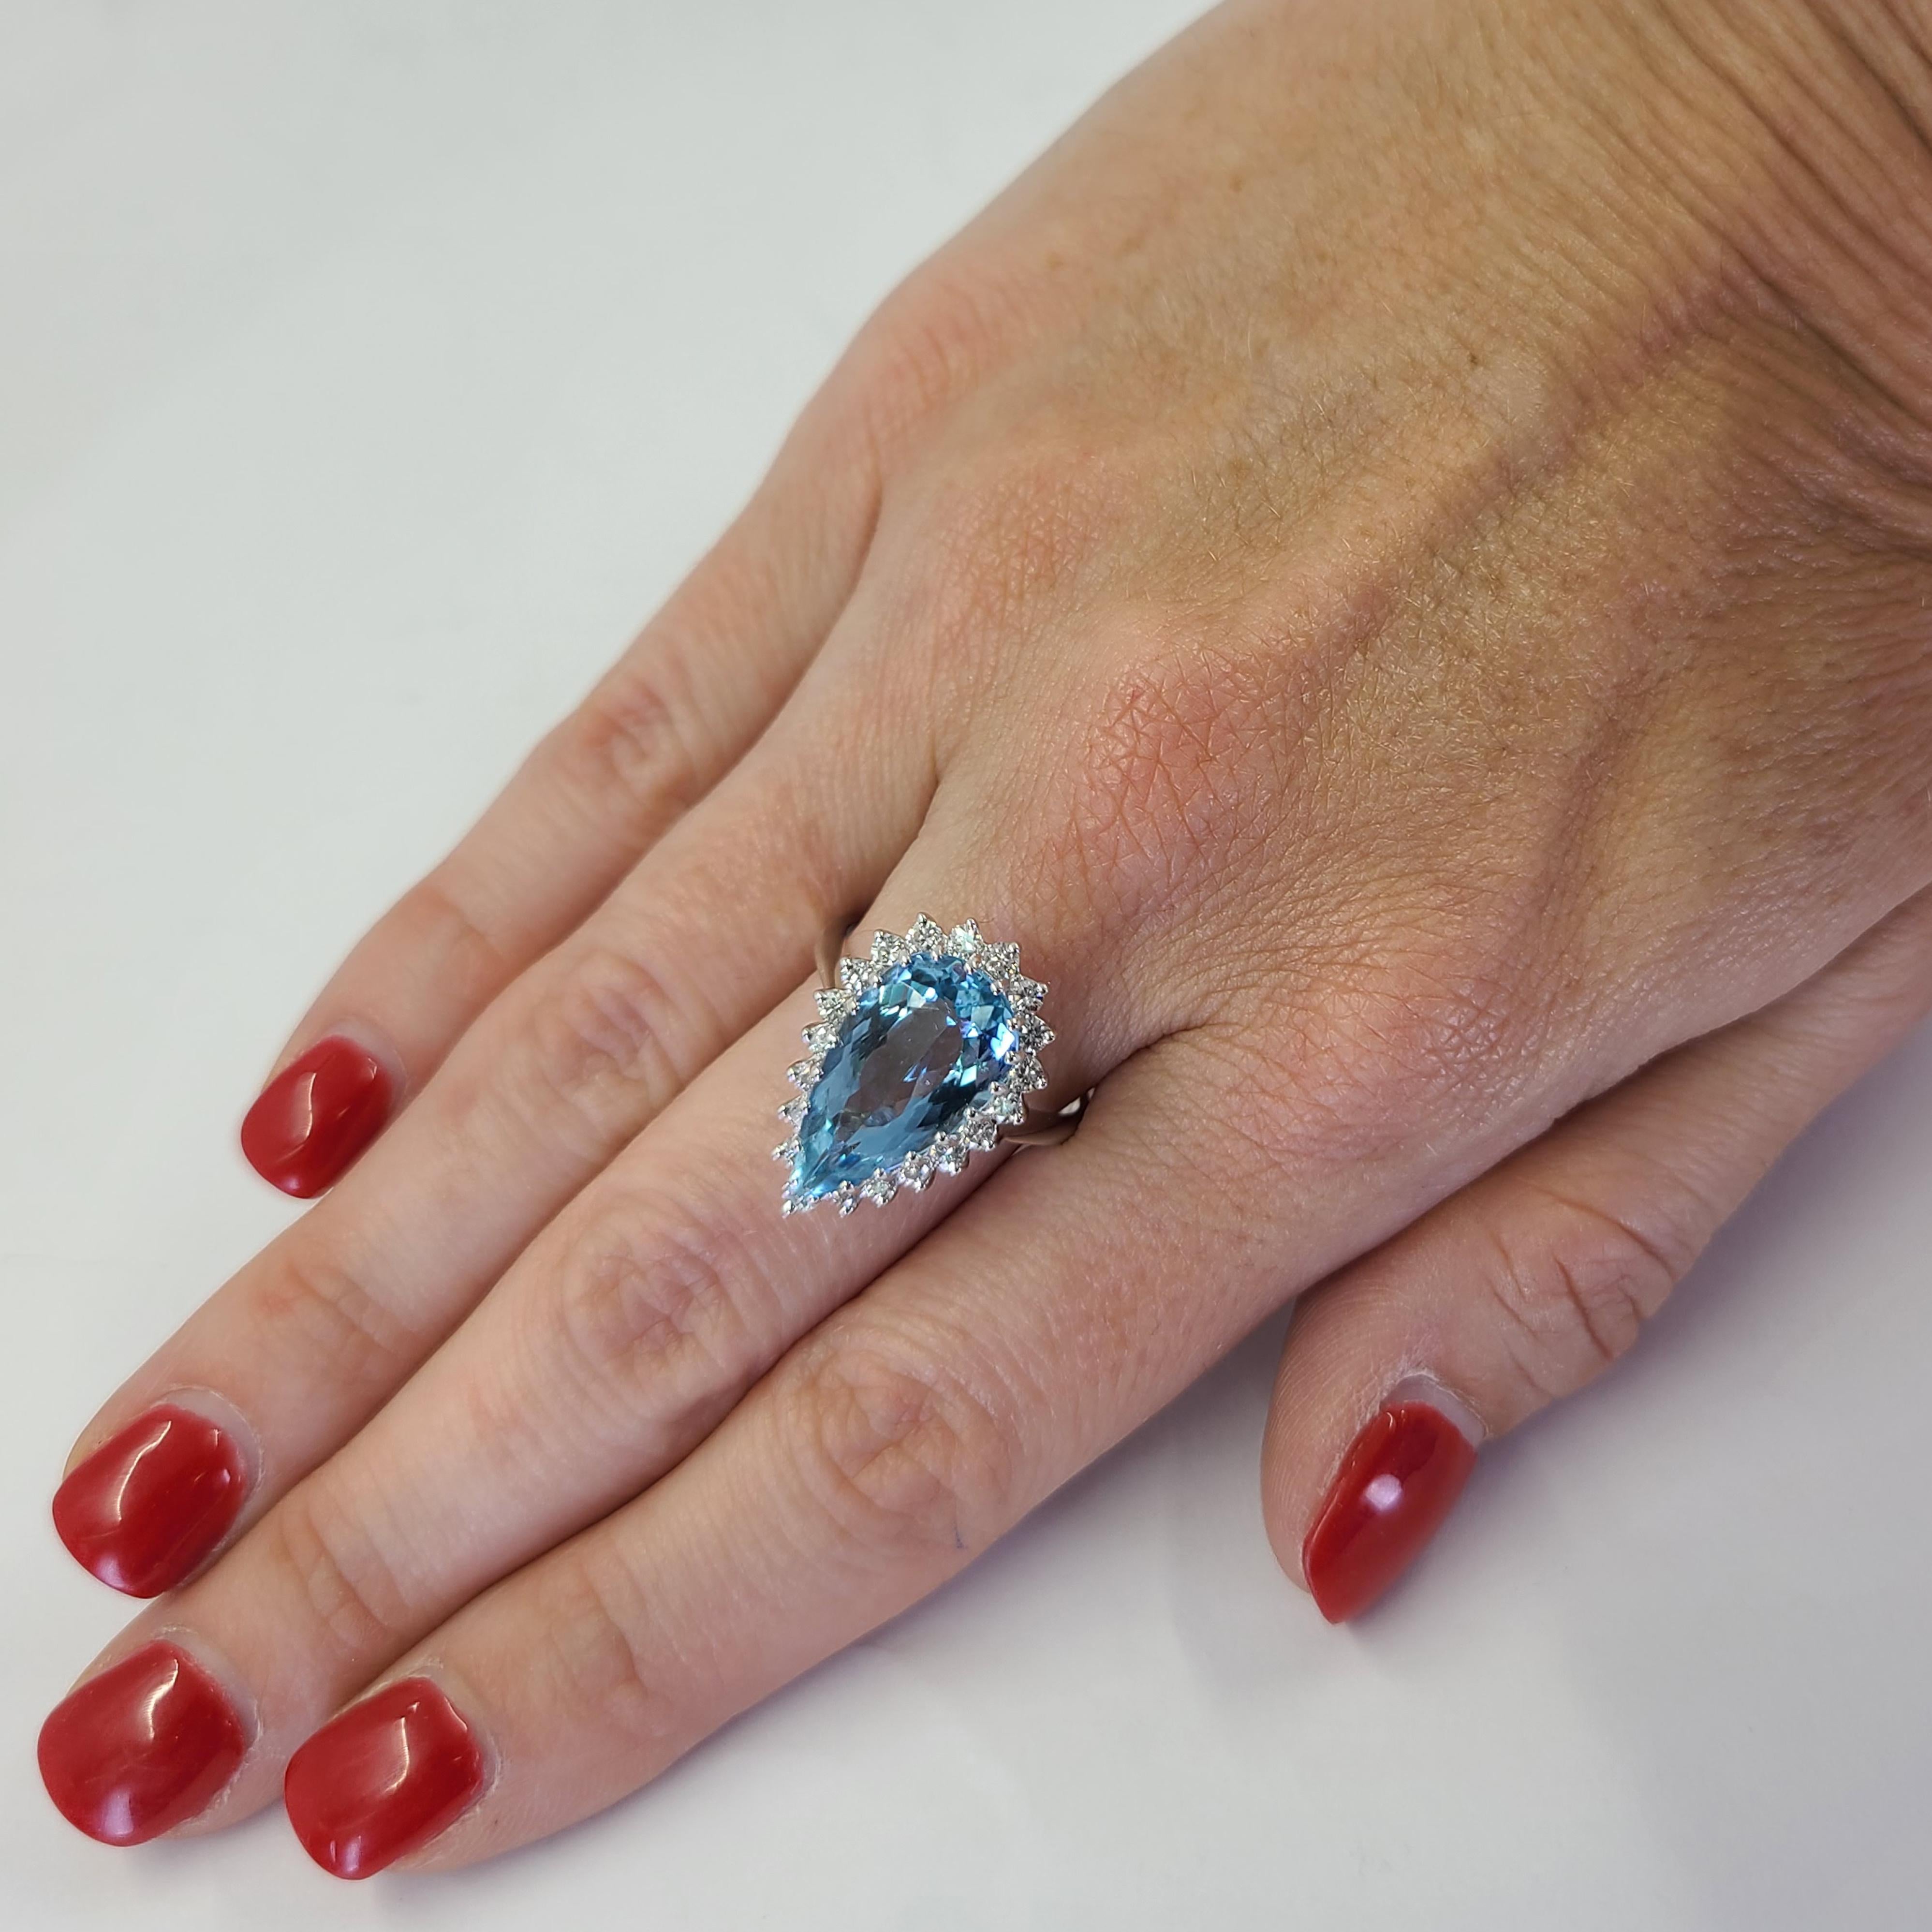 14 Karat White Gold Ring Featuring A 3.50 Carat Bright Blue Pear Cut Aquamarine Accented By A Halo of 20 Round Diamonds of VS Clarity and G Color Totaling 0.60 Carats. Finger Size 8; Purchase Includes One Sizing Service Prior to Shipping. Finished